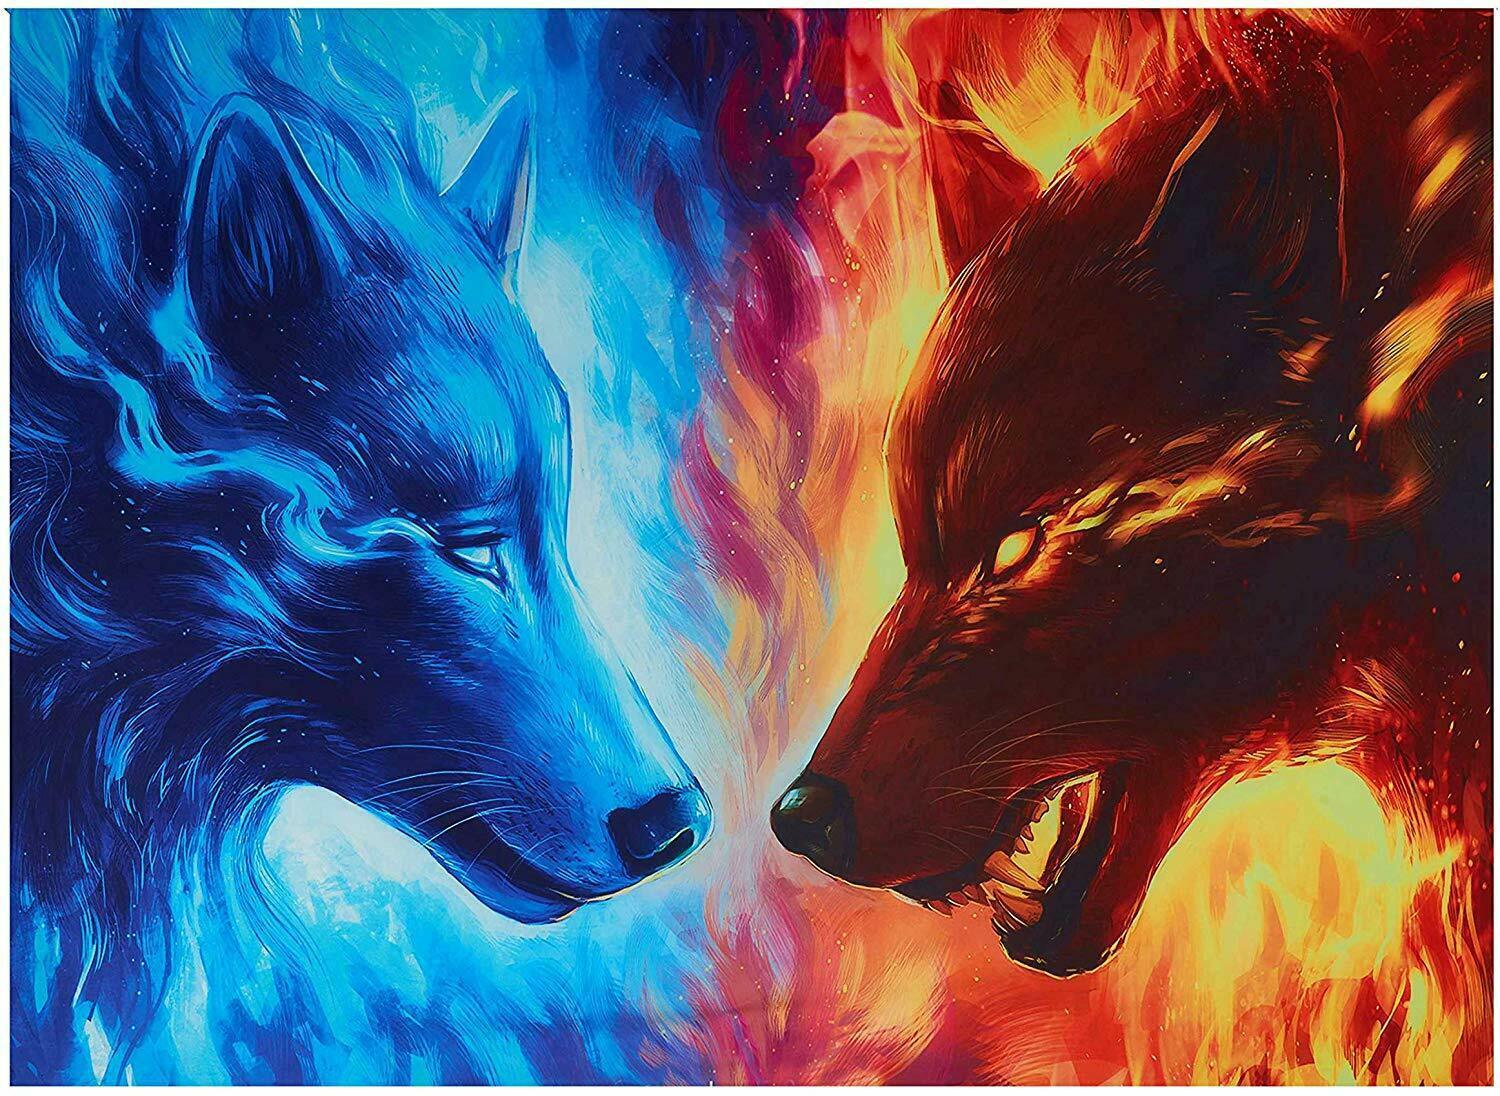 Tapestry Fire & Ice Wolves Blue & Red Wild Fierce Epic 79